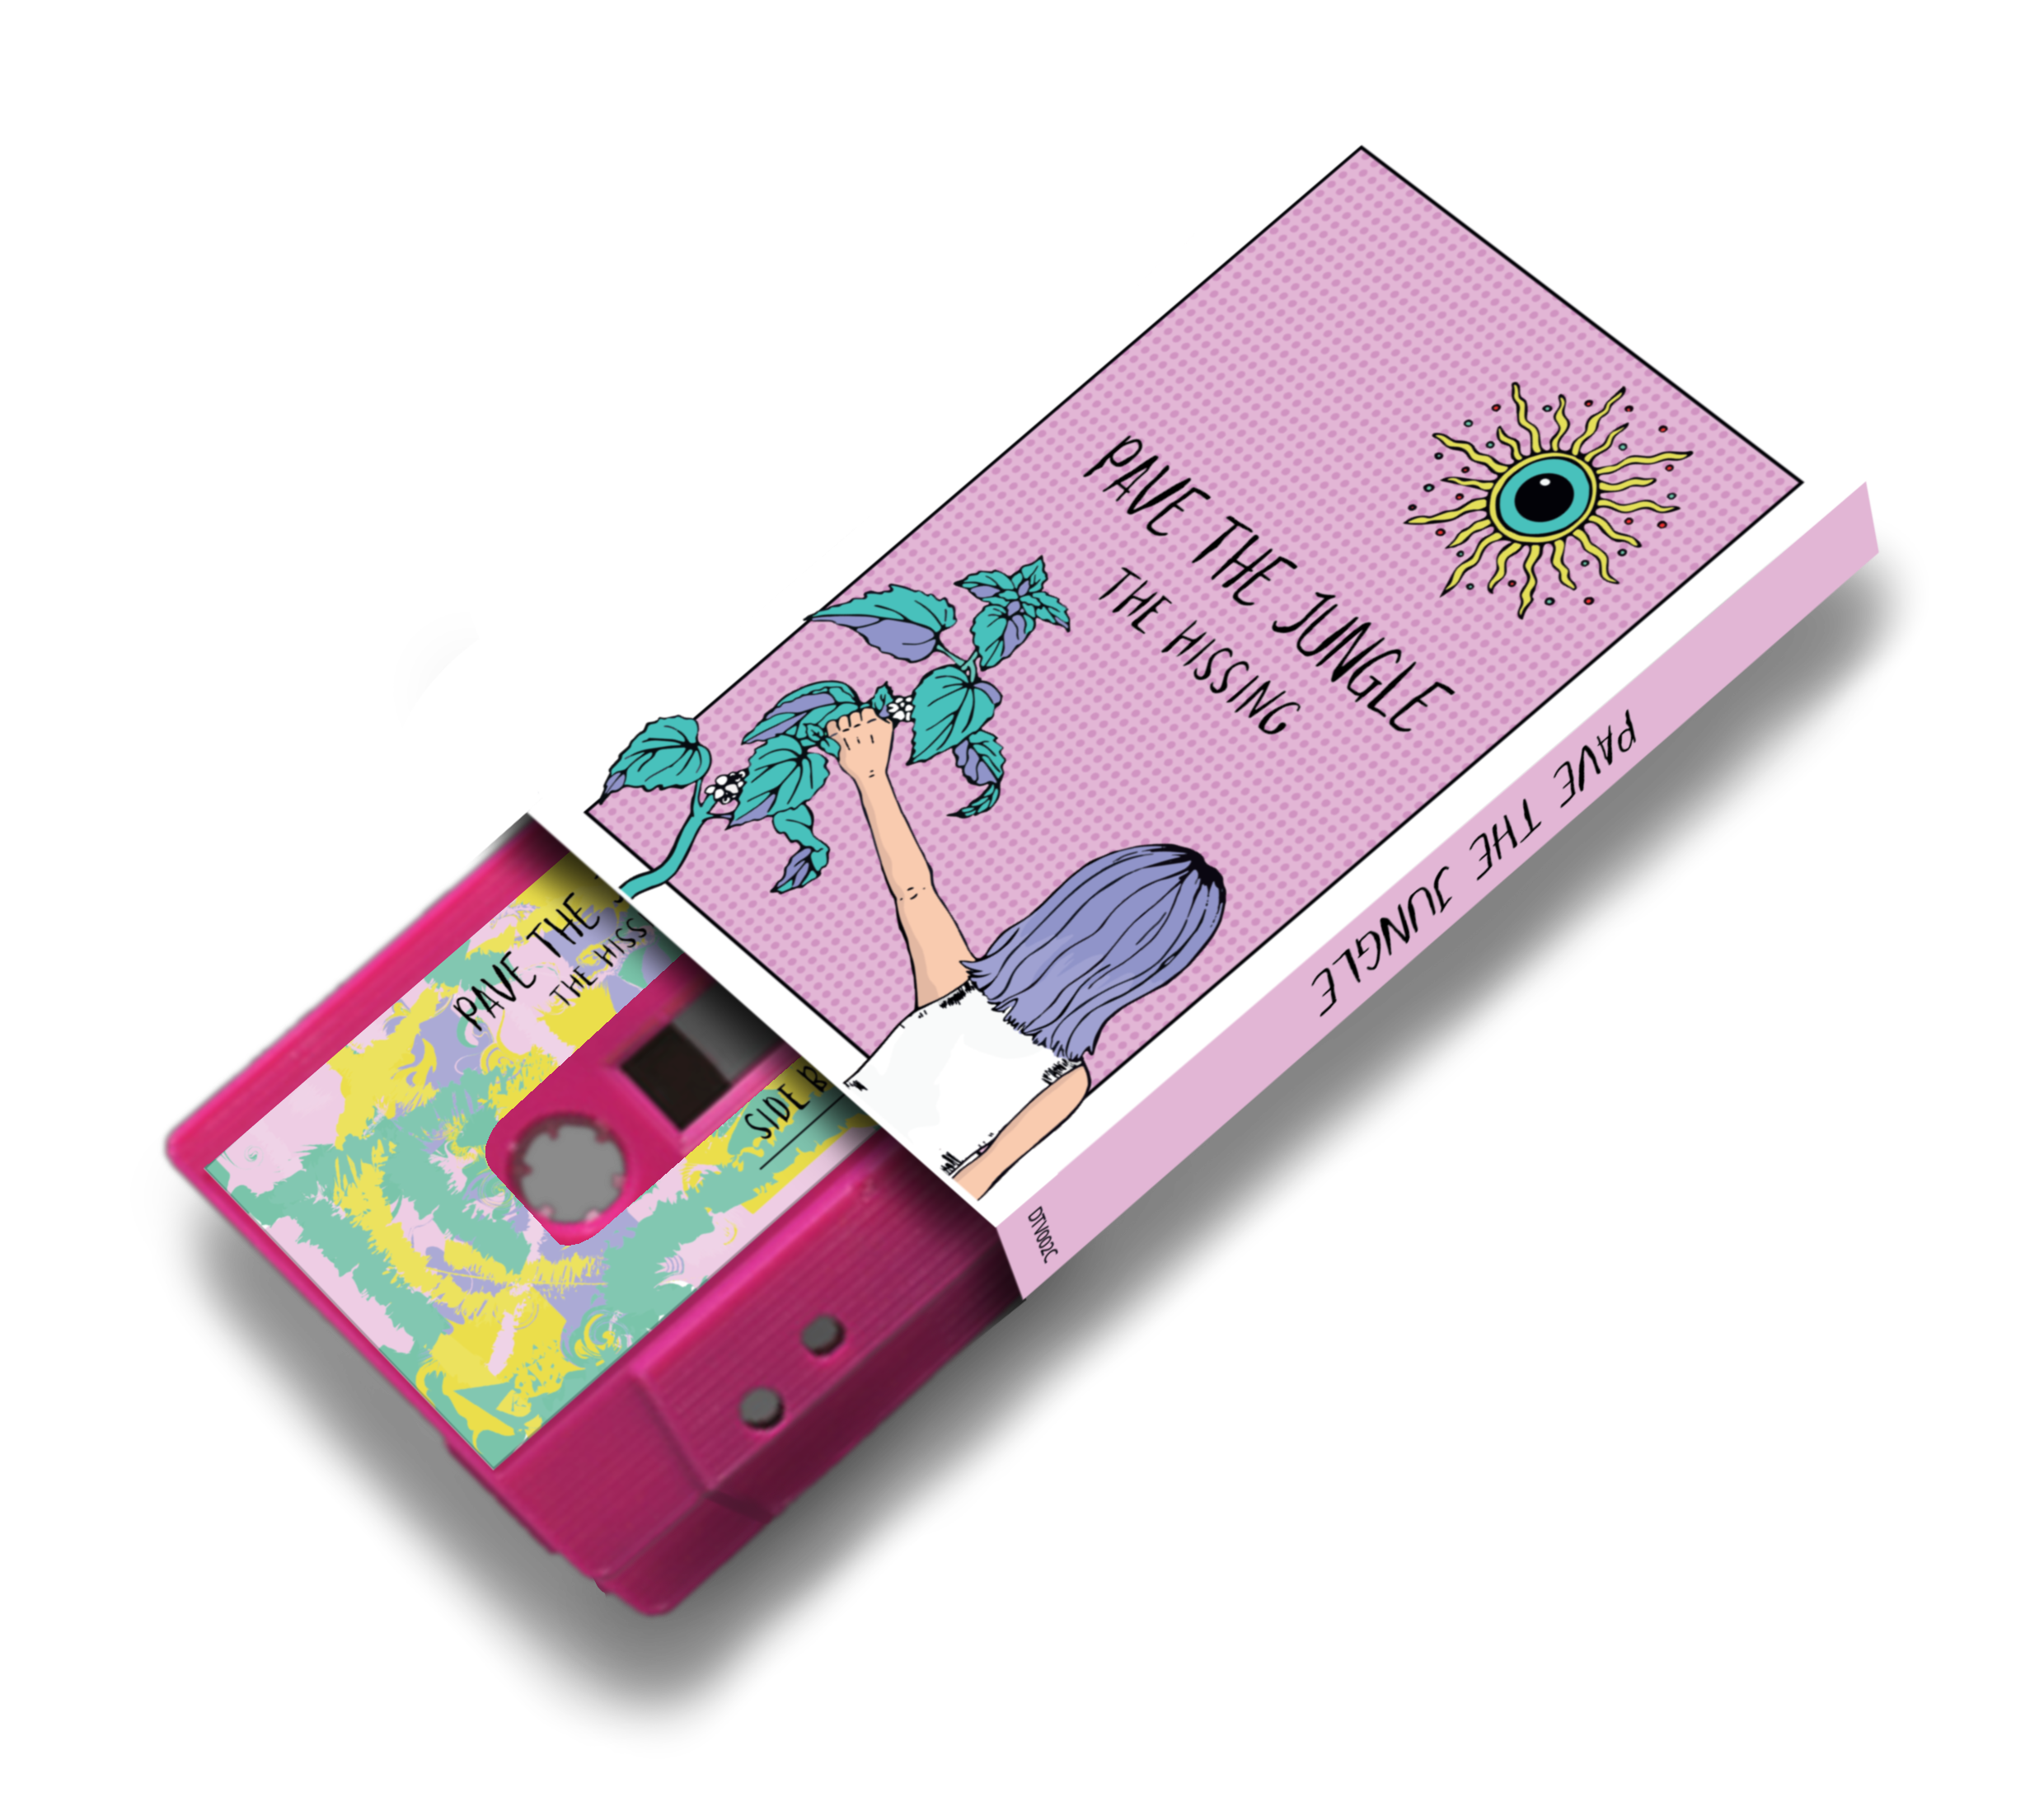 Pave The Jungle - ‘The Hissing’ Ltd Edition Cassette Mini Zine Duo - Hot Pink